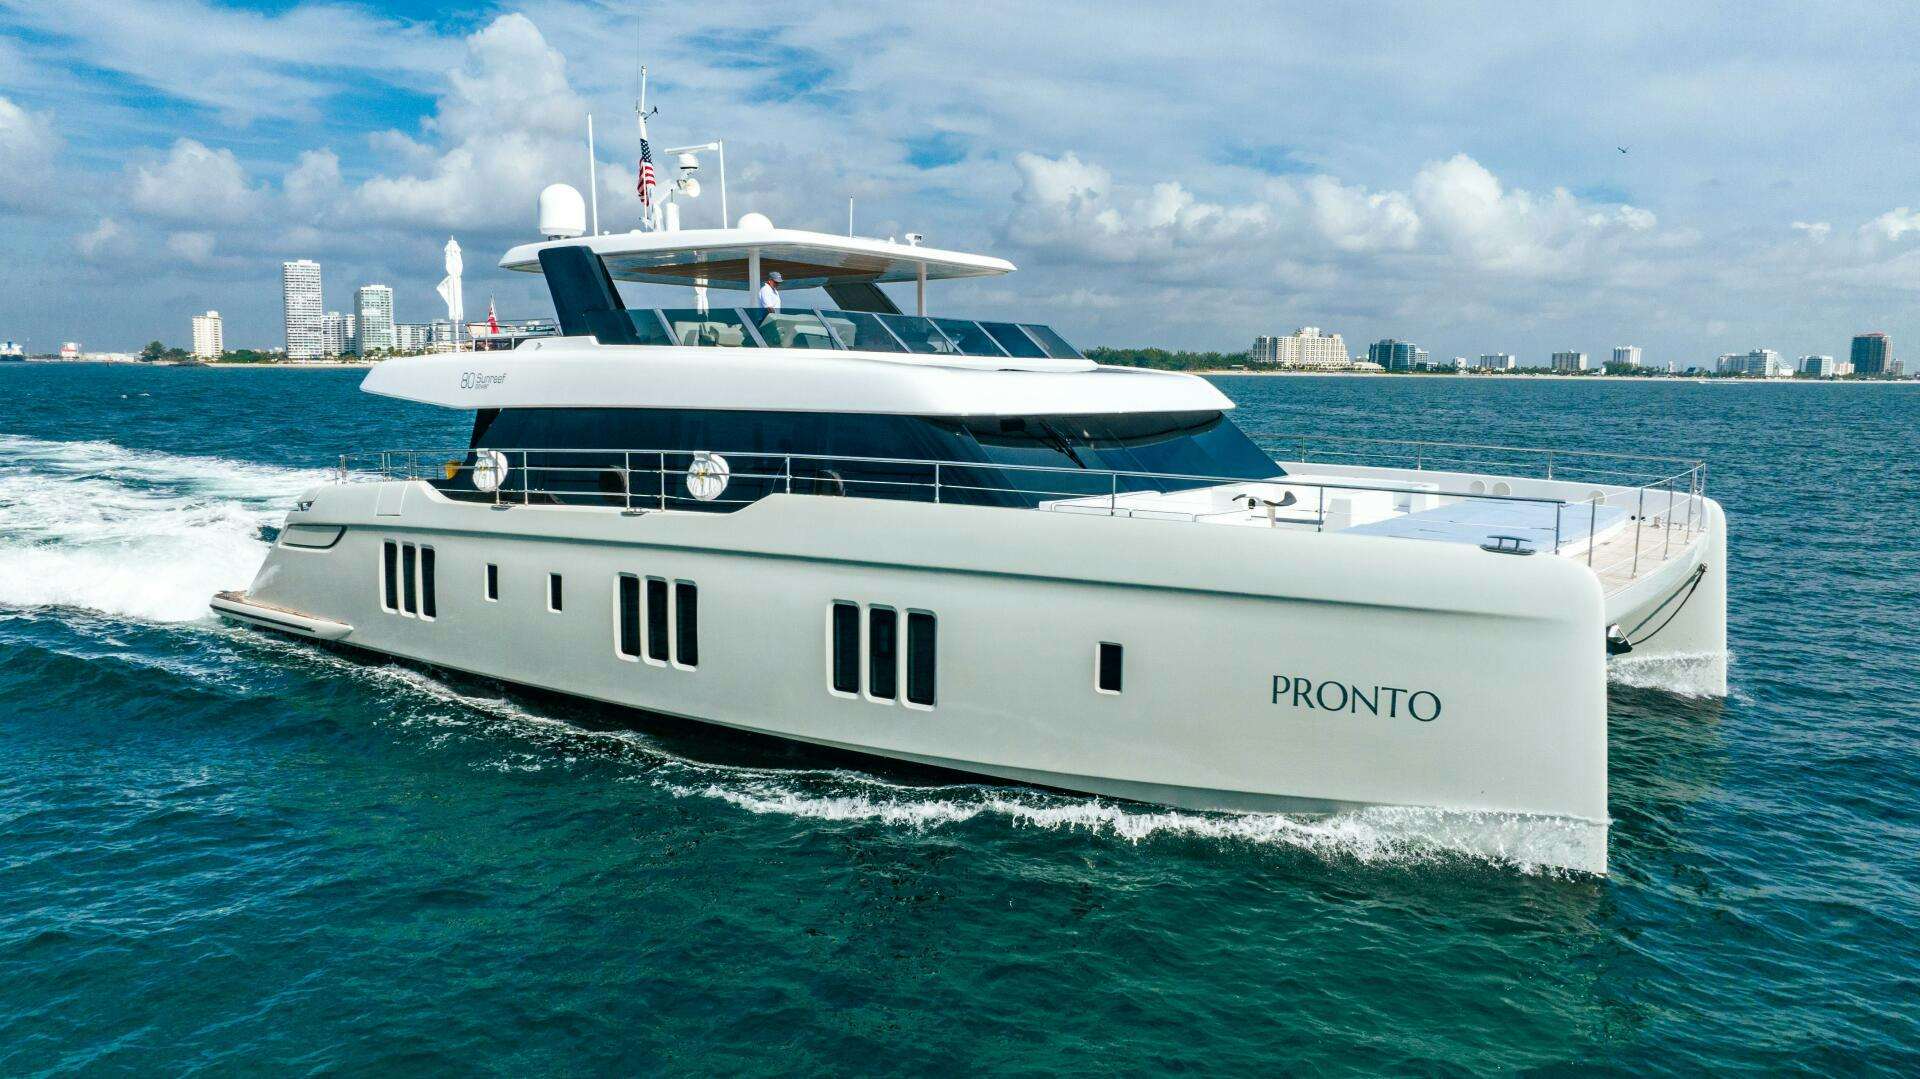 Pronto
Yacht for Sale